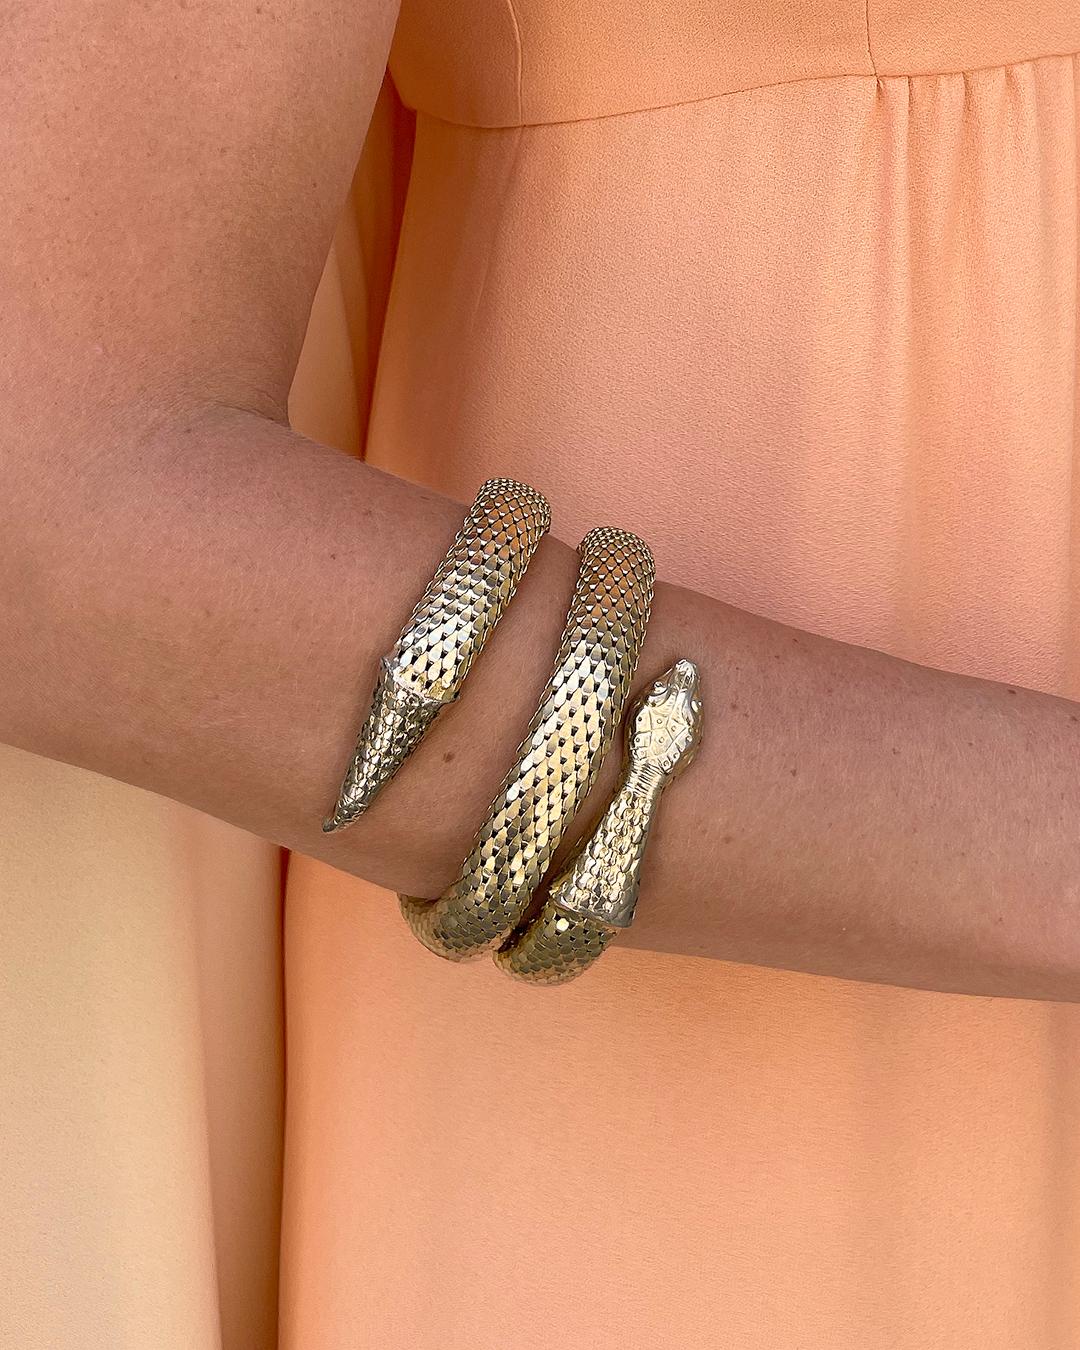 Vintage Gold Snake Bracelet, attributed to Whiting & Davis: I absolutely love serpent jewelry— the Victorians did as well, and I love the romance that these sinuous creatures conjure in the context of jewels. This bracelet is easy to wear two ways: